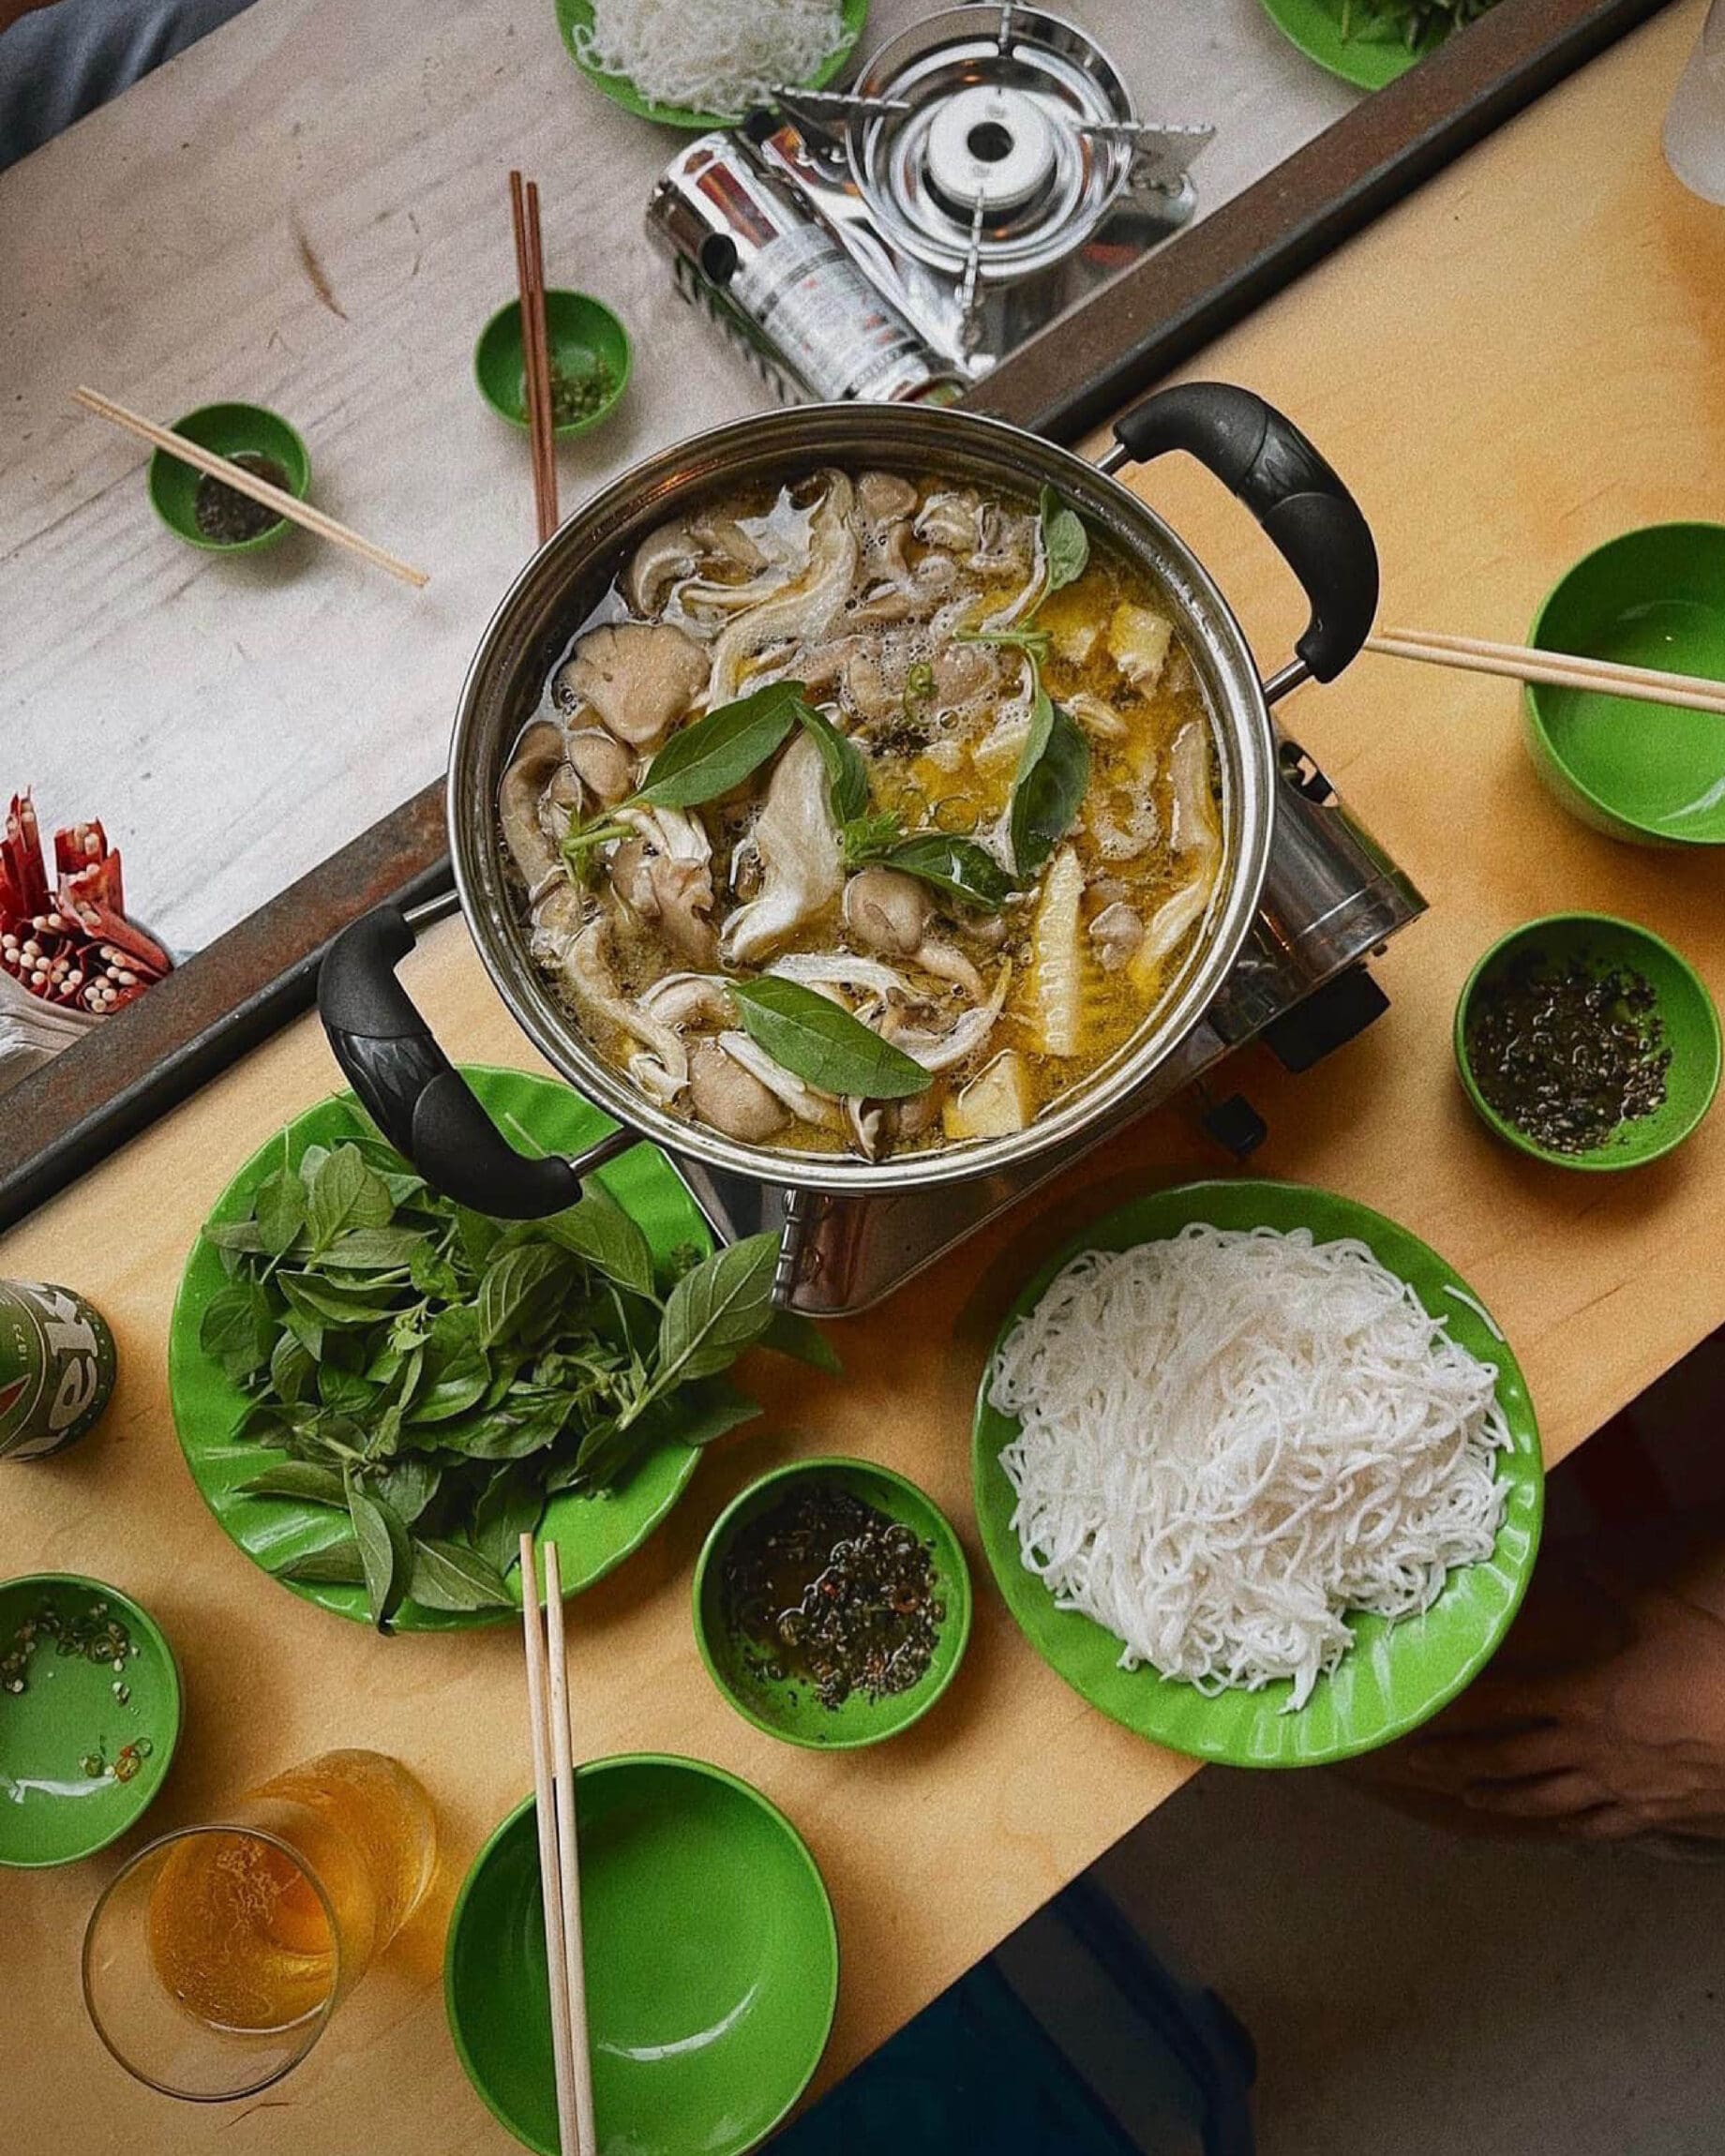 The best restaurants in New York City | Chicken hotpot with citrus basil at Mam served with a side of noodles and sauces.